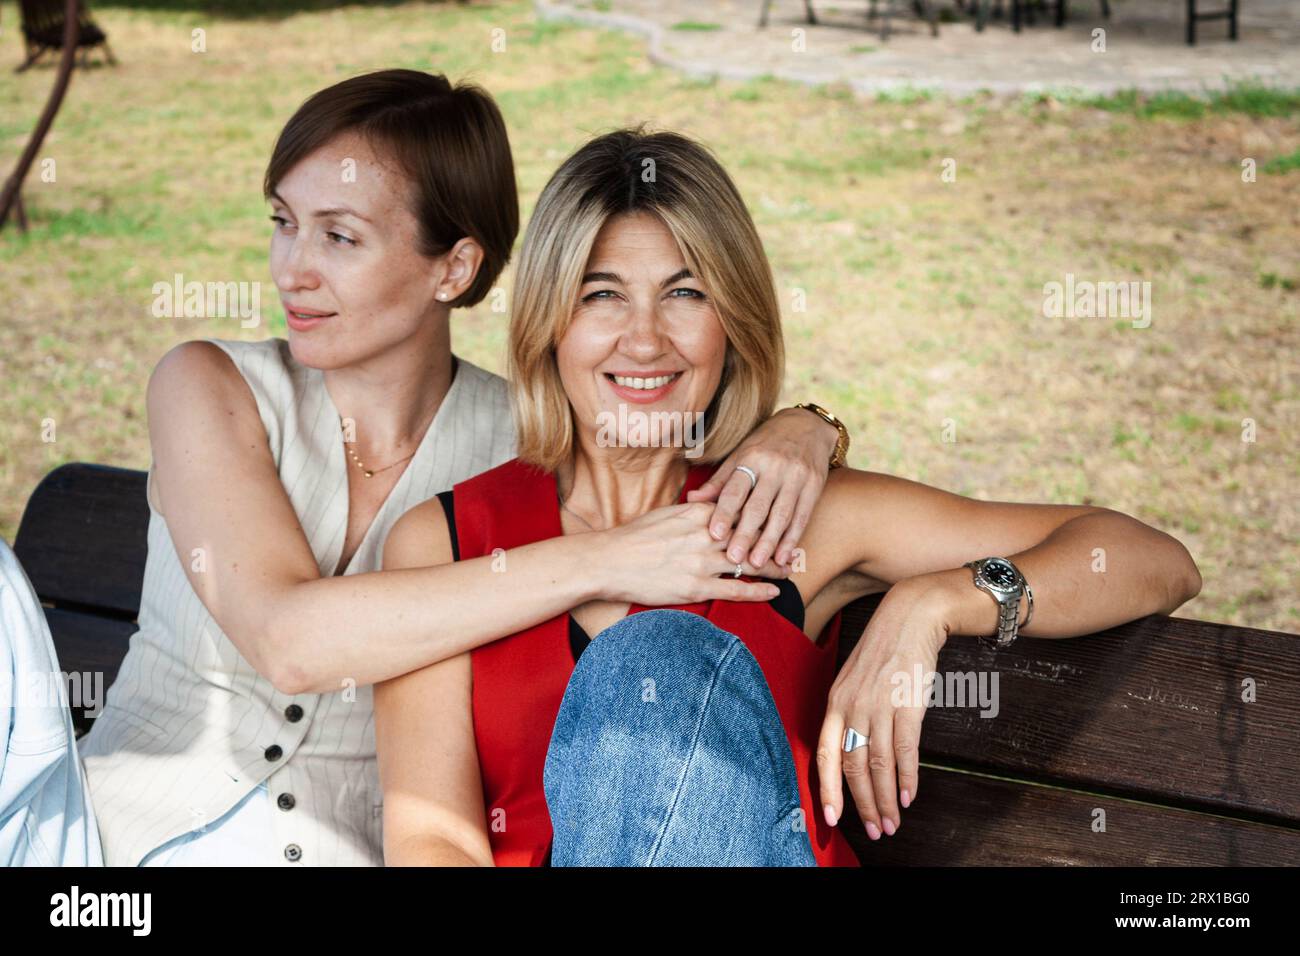 two fashionable women sitting on a wooden bench, outdoors Stock Photo